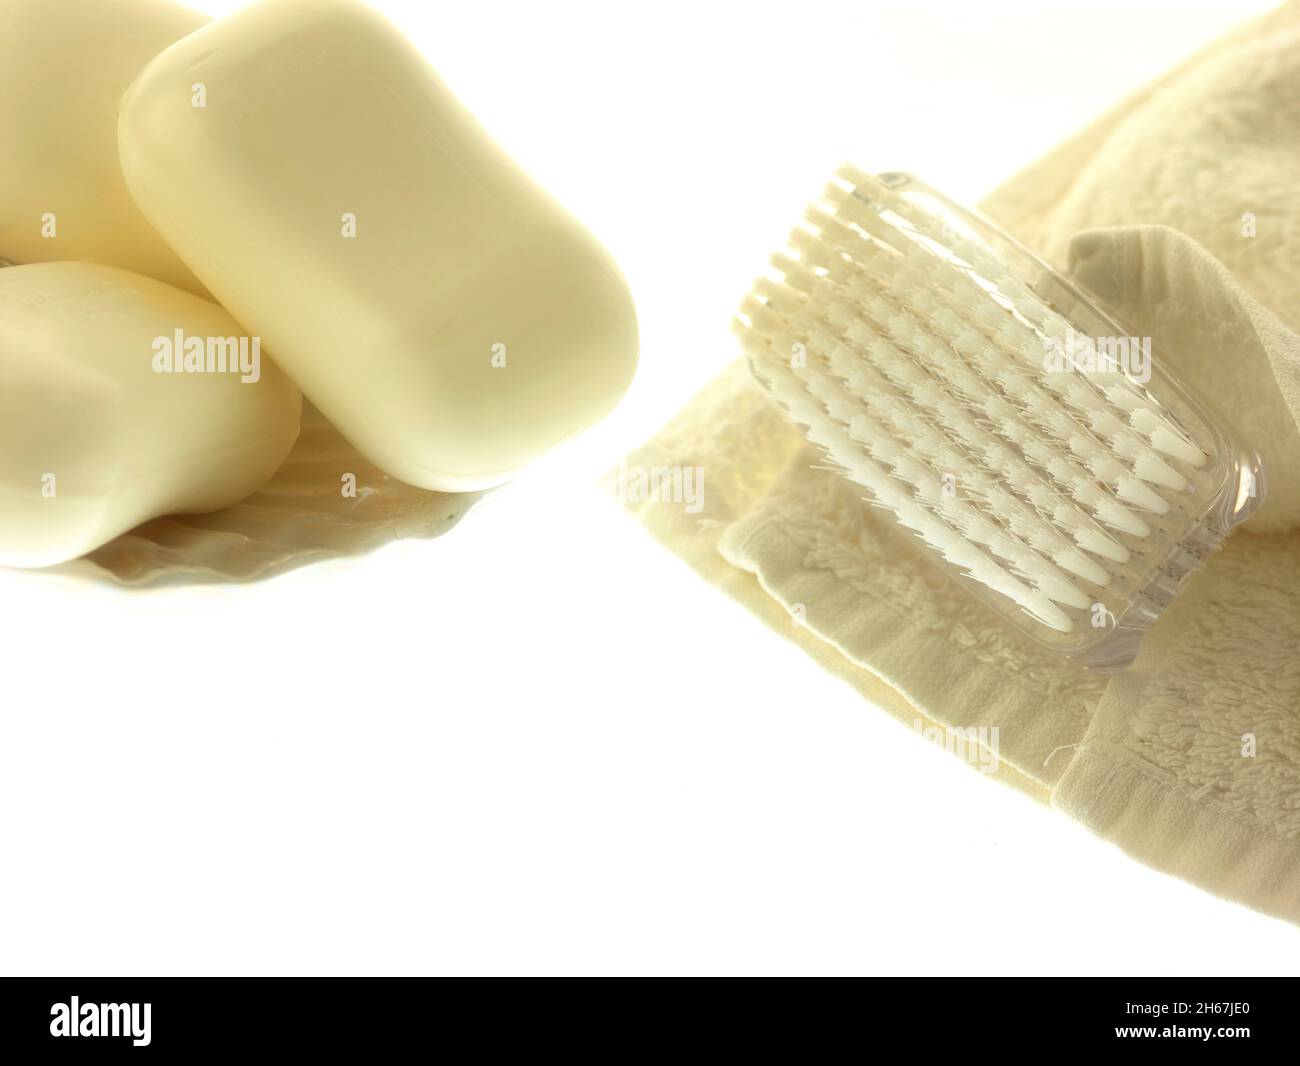 Coronavirus disease, COVID-19, close-up still life of handwashing implements (soap / flannel / nailbrush) to promote infection control Stock Photo